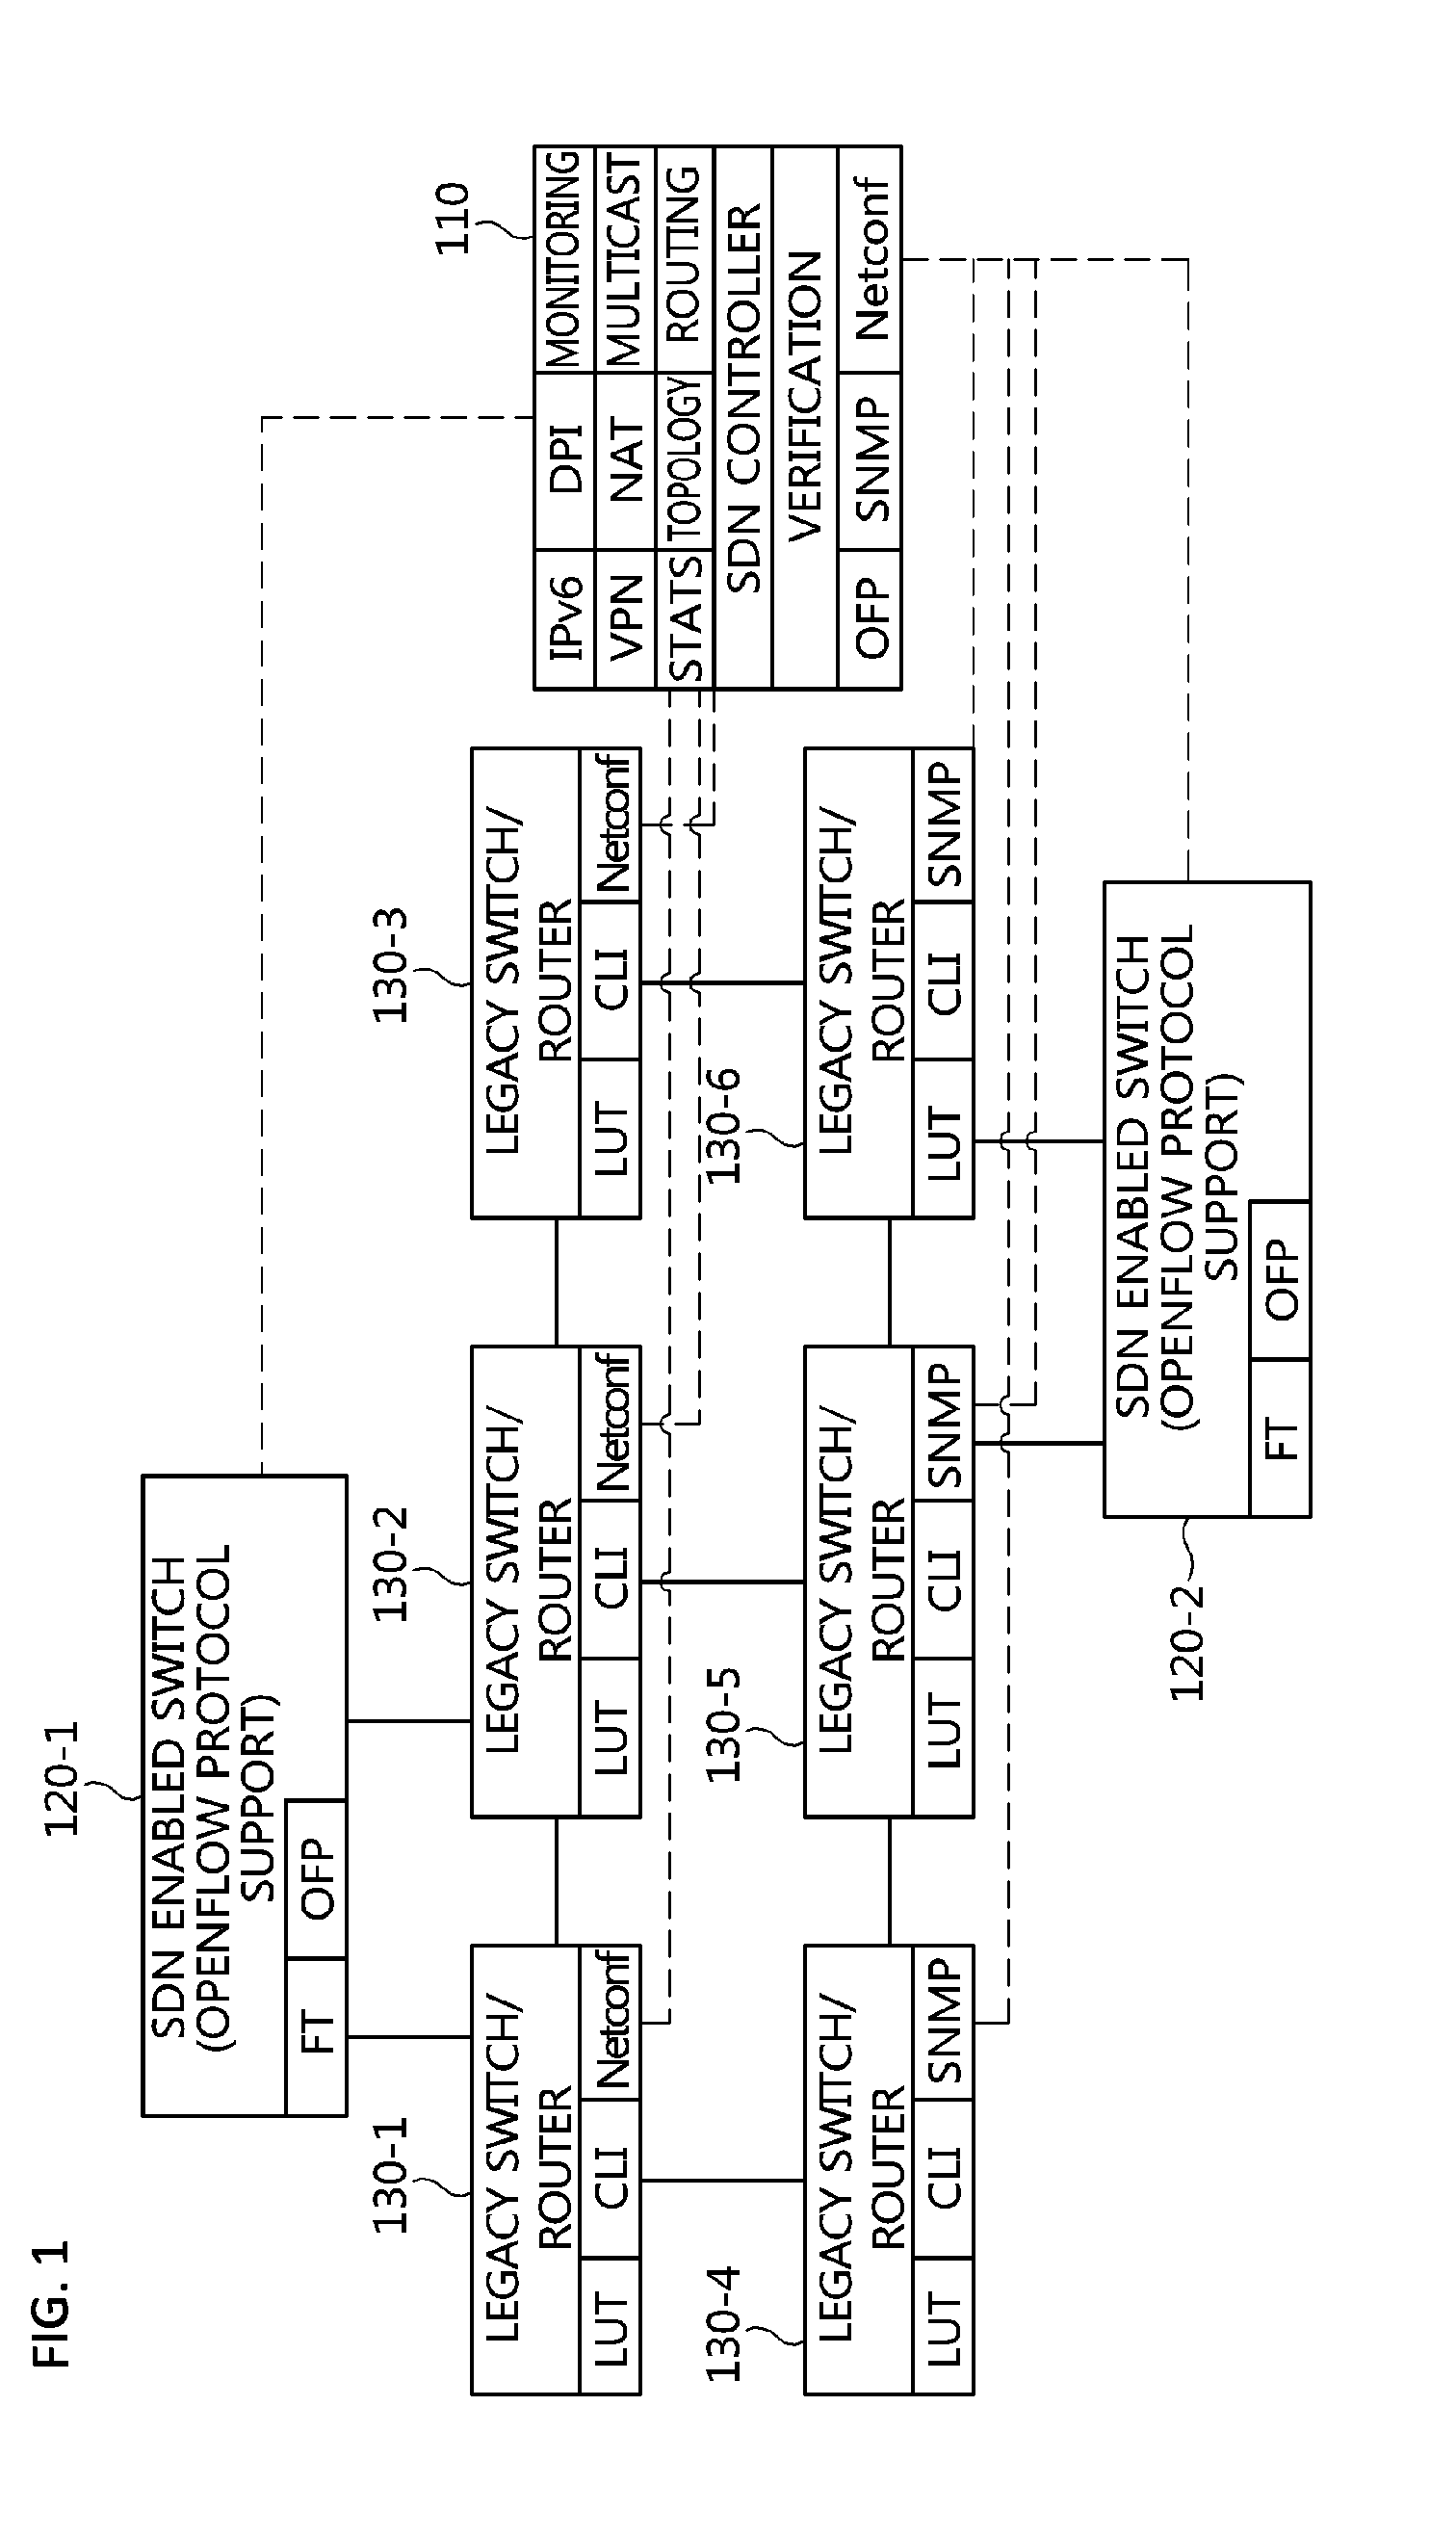 Apparatus and method for controlling network service in environment of interworking between software defined network and legacy network